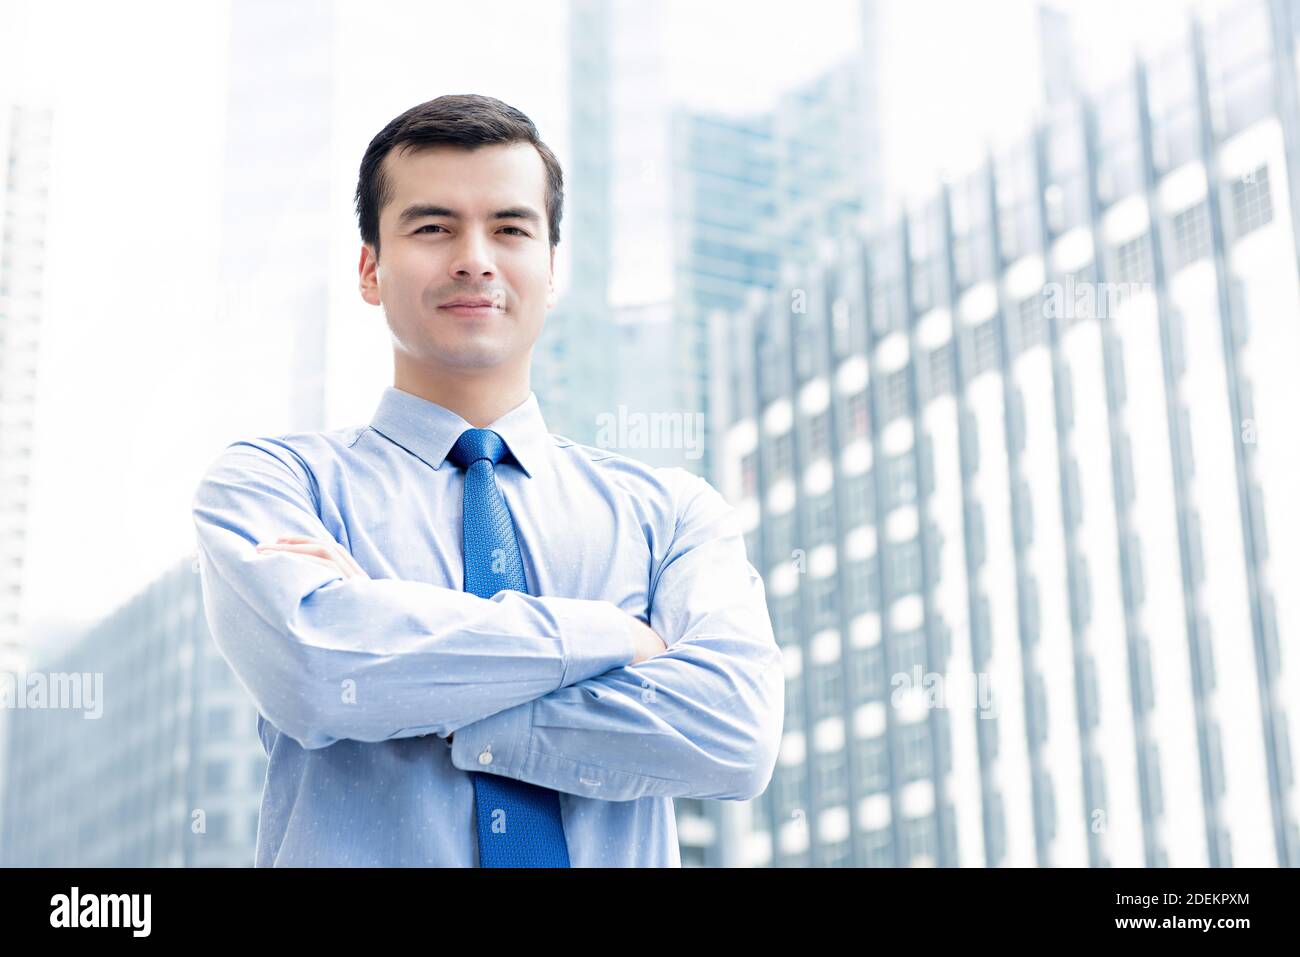 Handsome young businessman leader confidently standing with arm crossed in city office building background Stock Photo